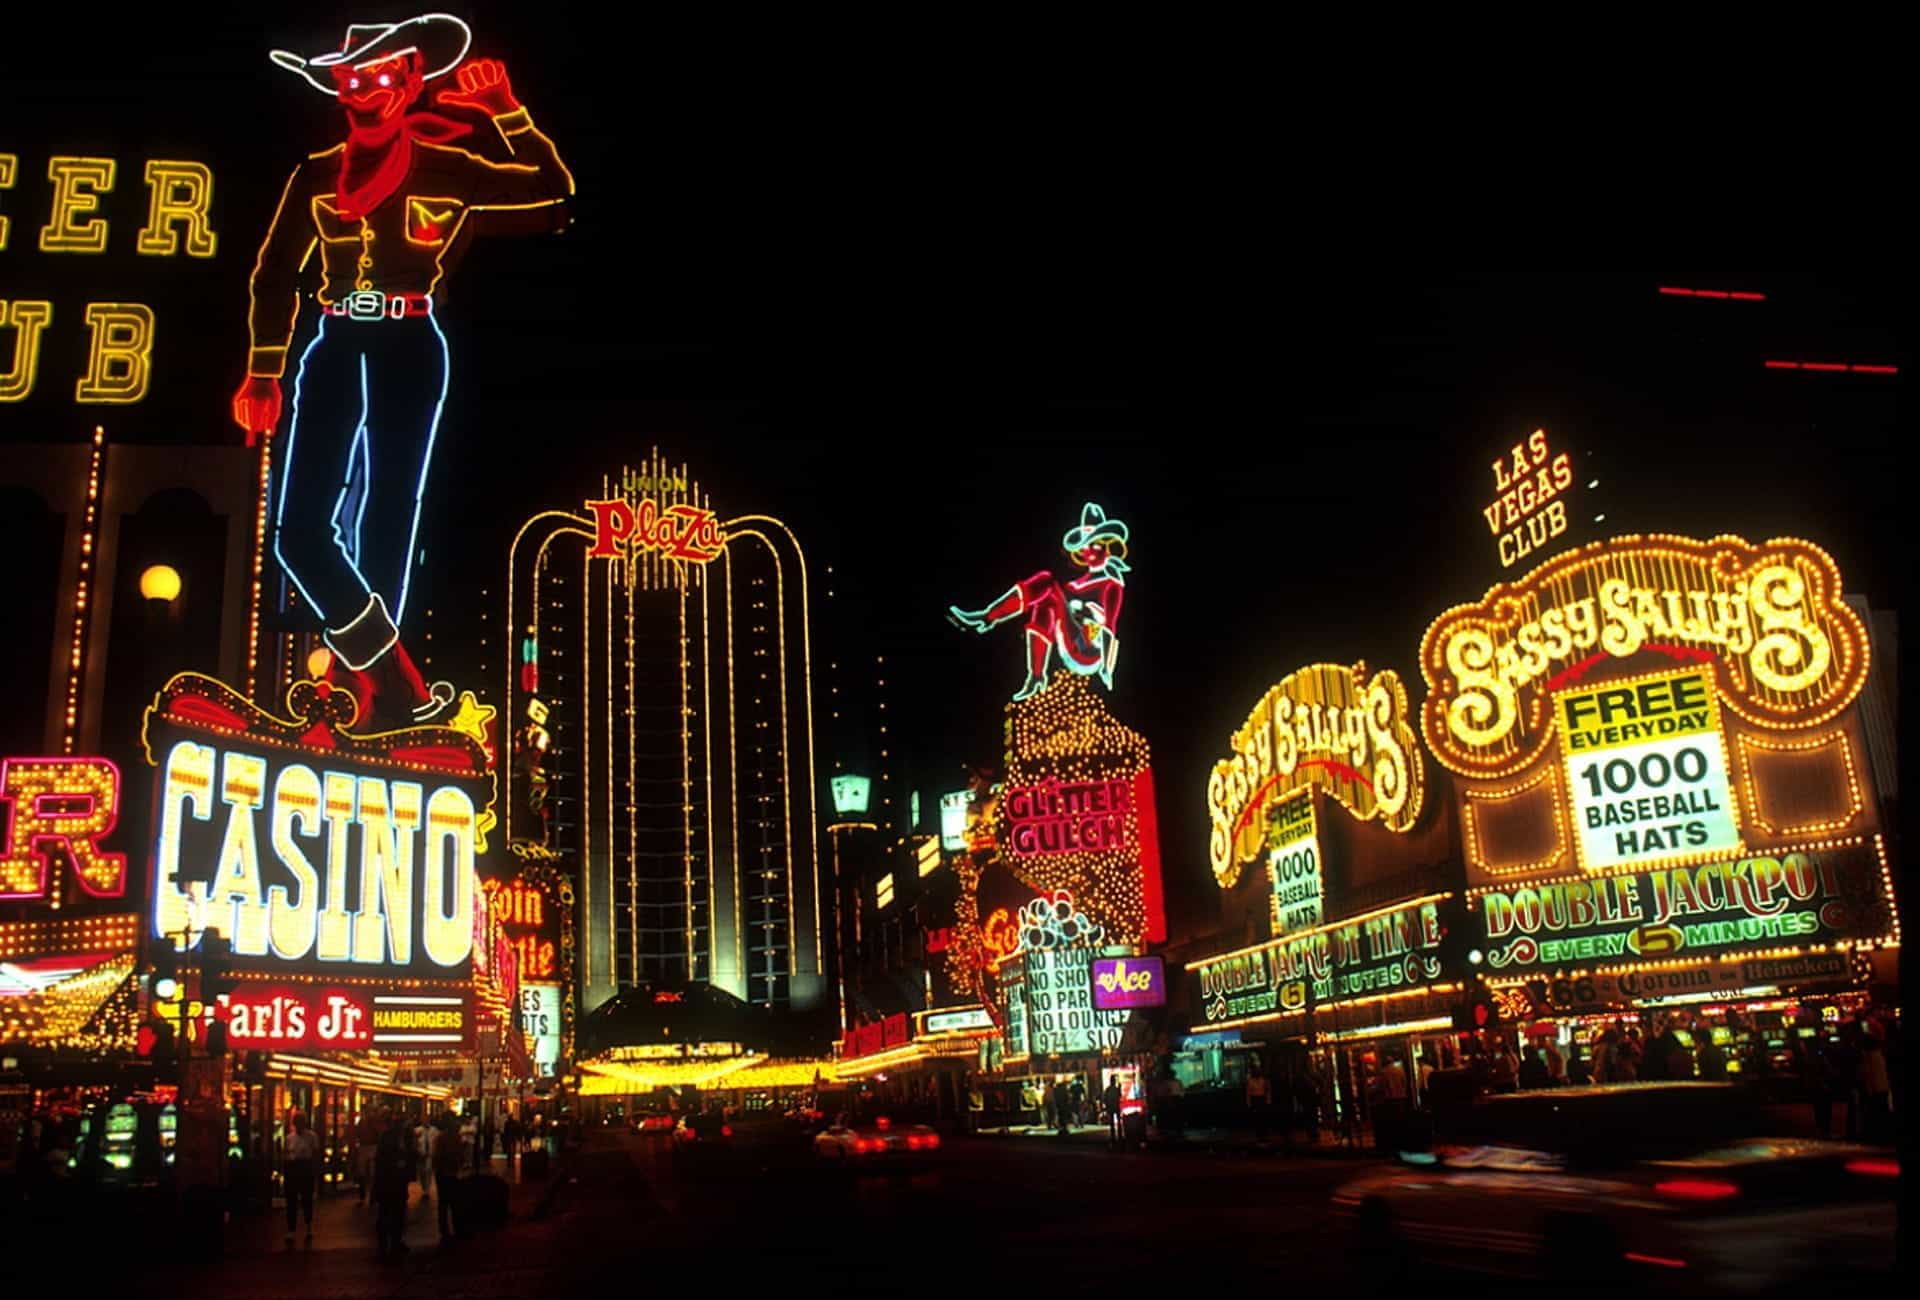 A view of Las Vegas strip at nighttime, lit up with neon casino signs